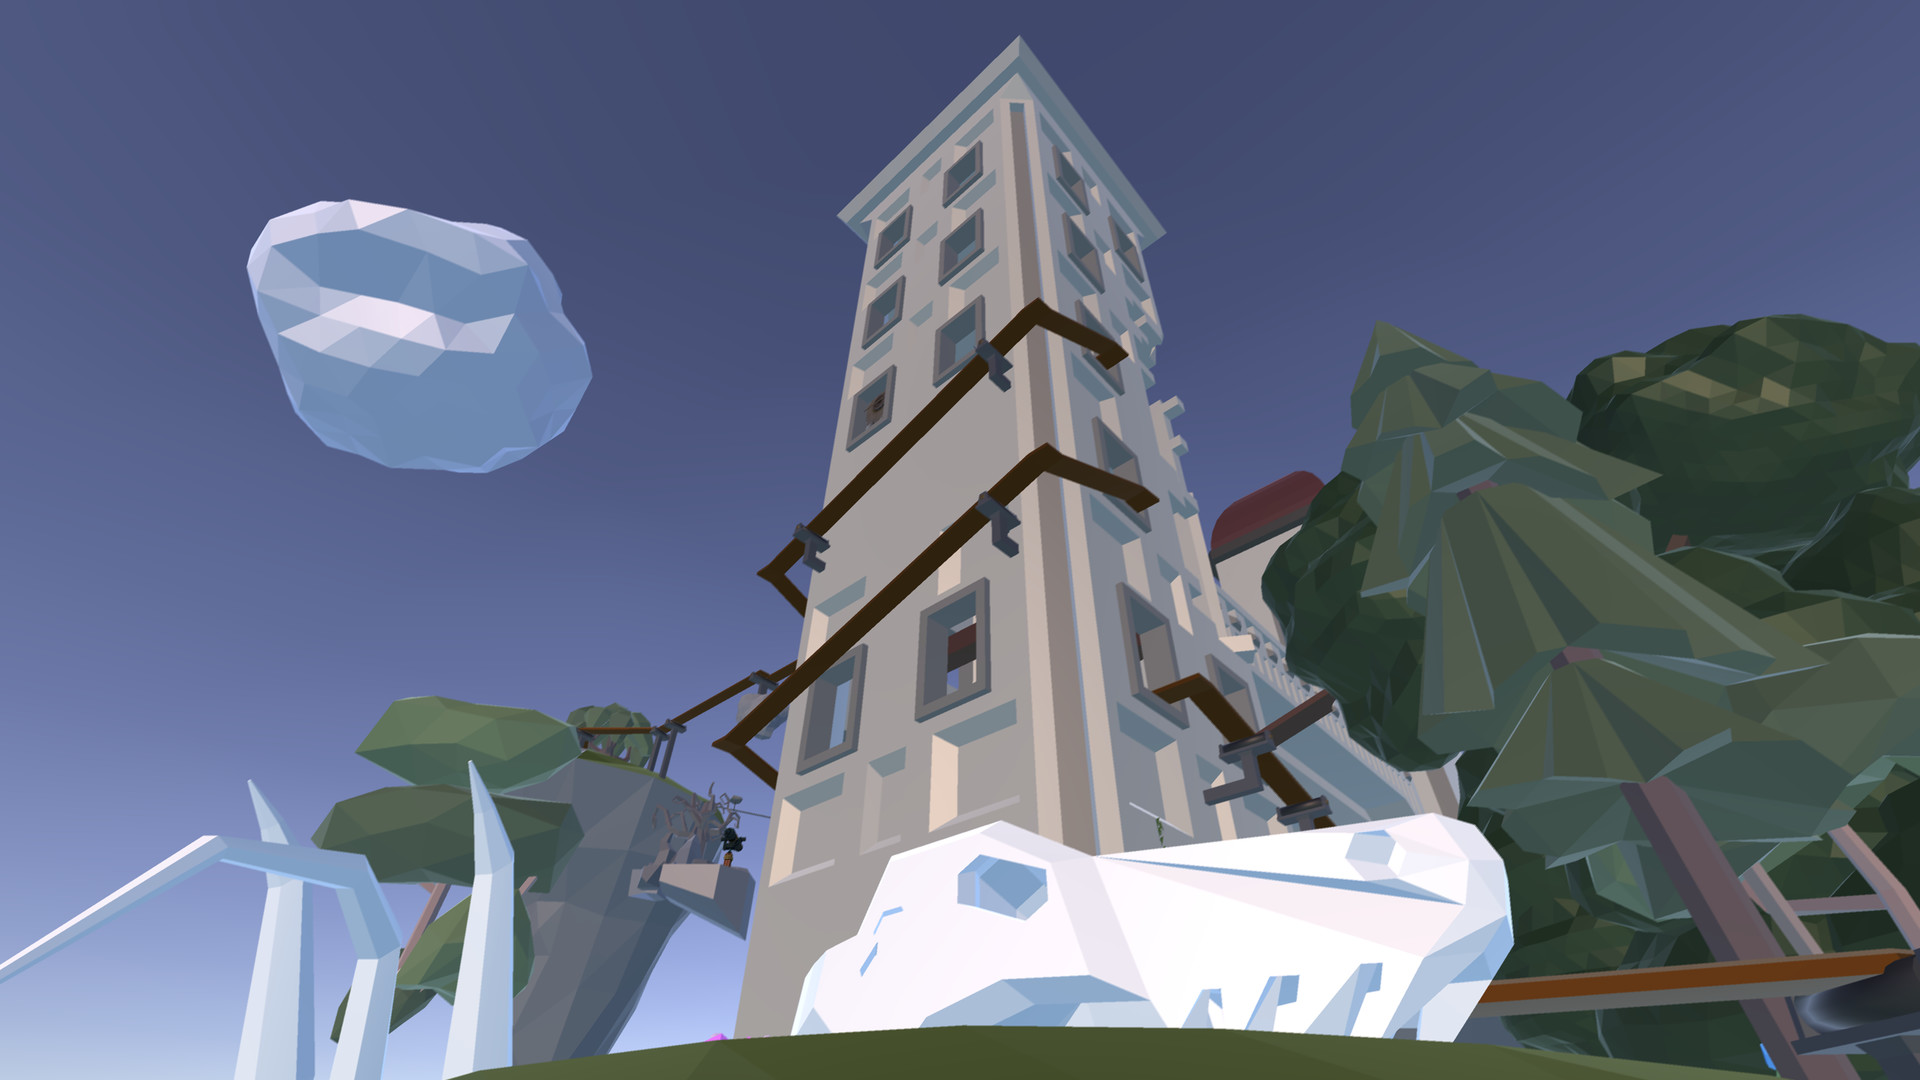 Tower adventures. Игра Tower. Башня аркада. The Tower VR. Игра Tetra Tower.